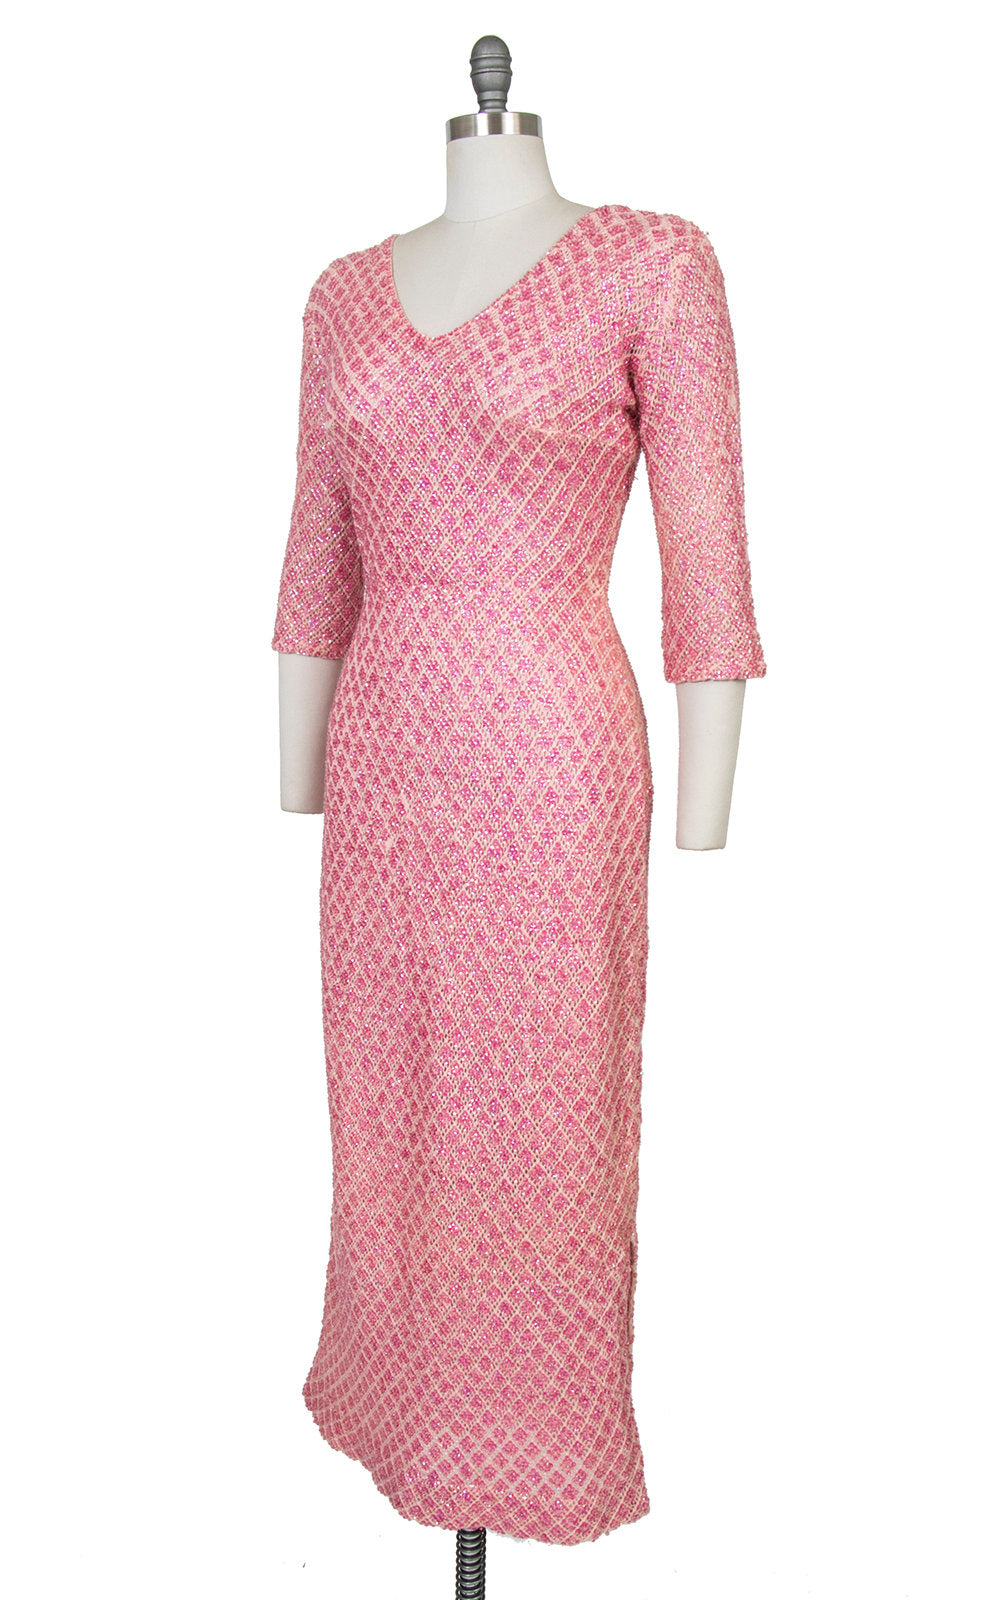 Vintage 1960s Sweater Dress | 60s Pink Iridescent Sequin Beaded Knit Wool Full Length Formal Evening Party Gown (medium/large)